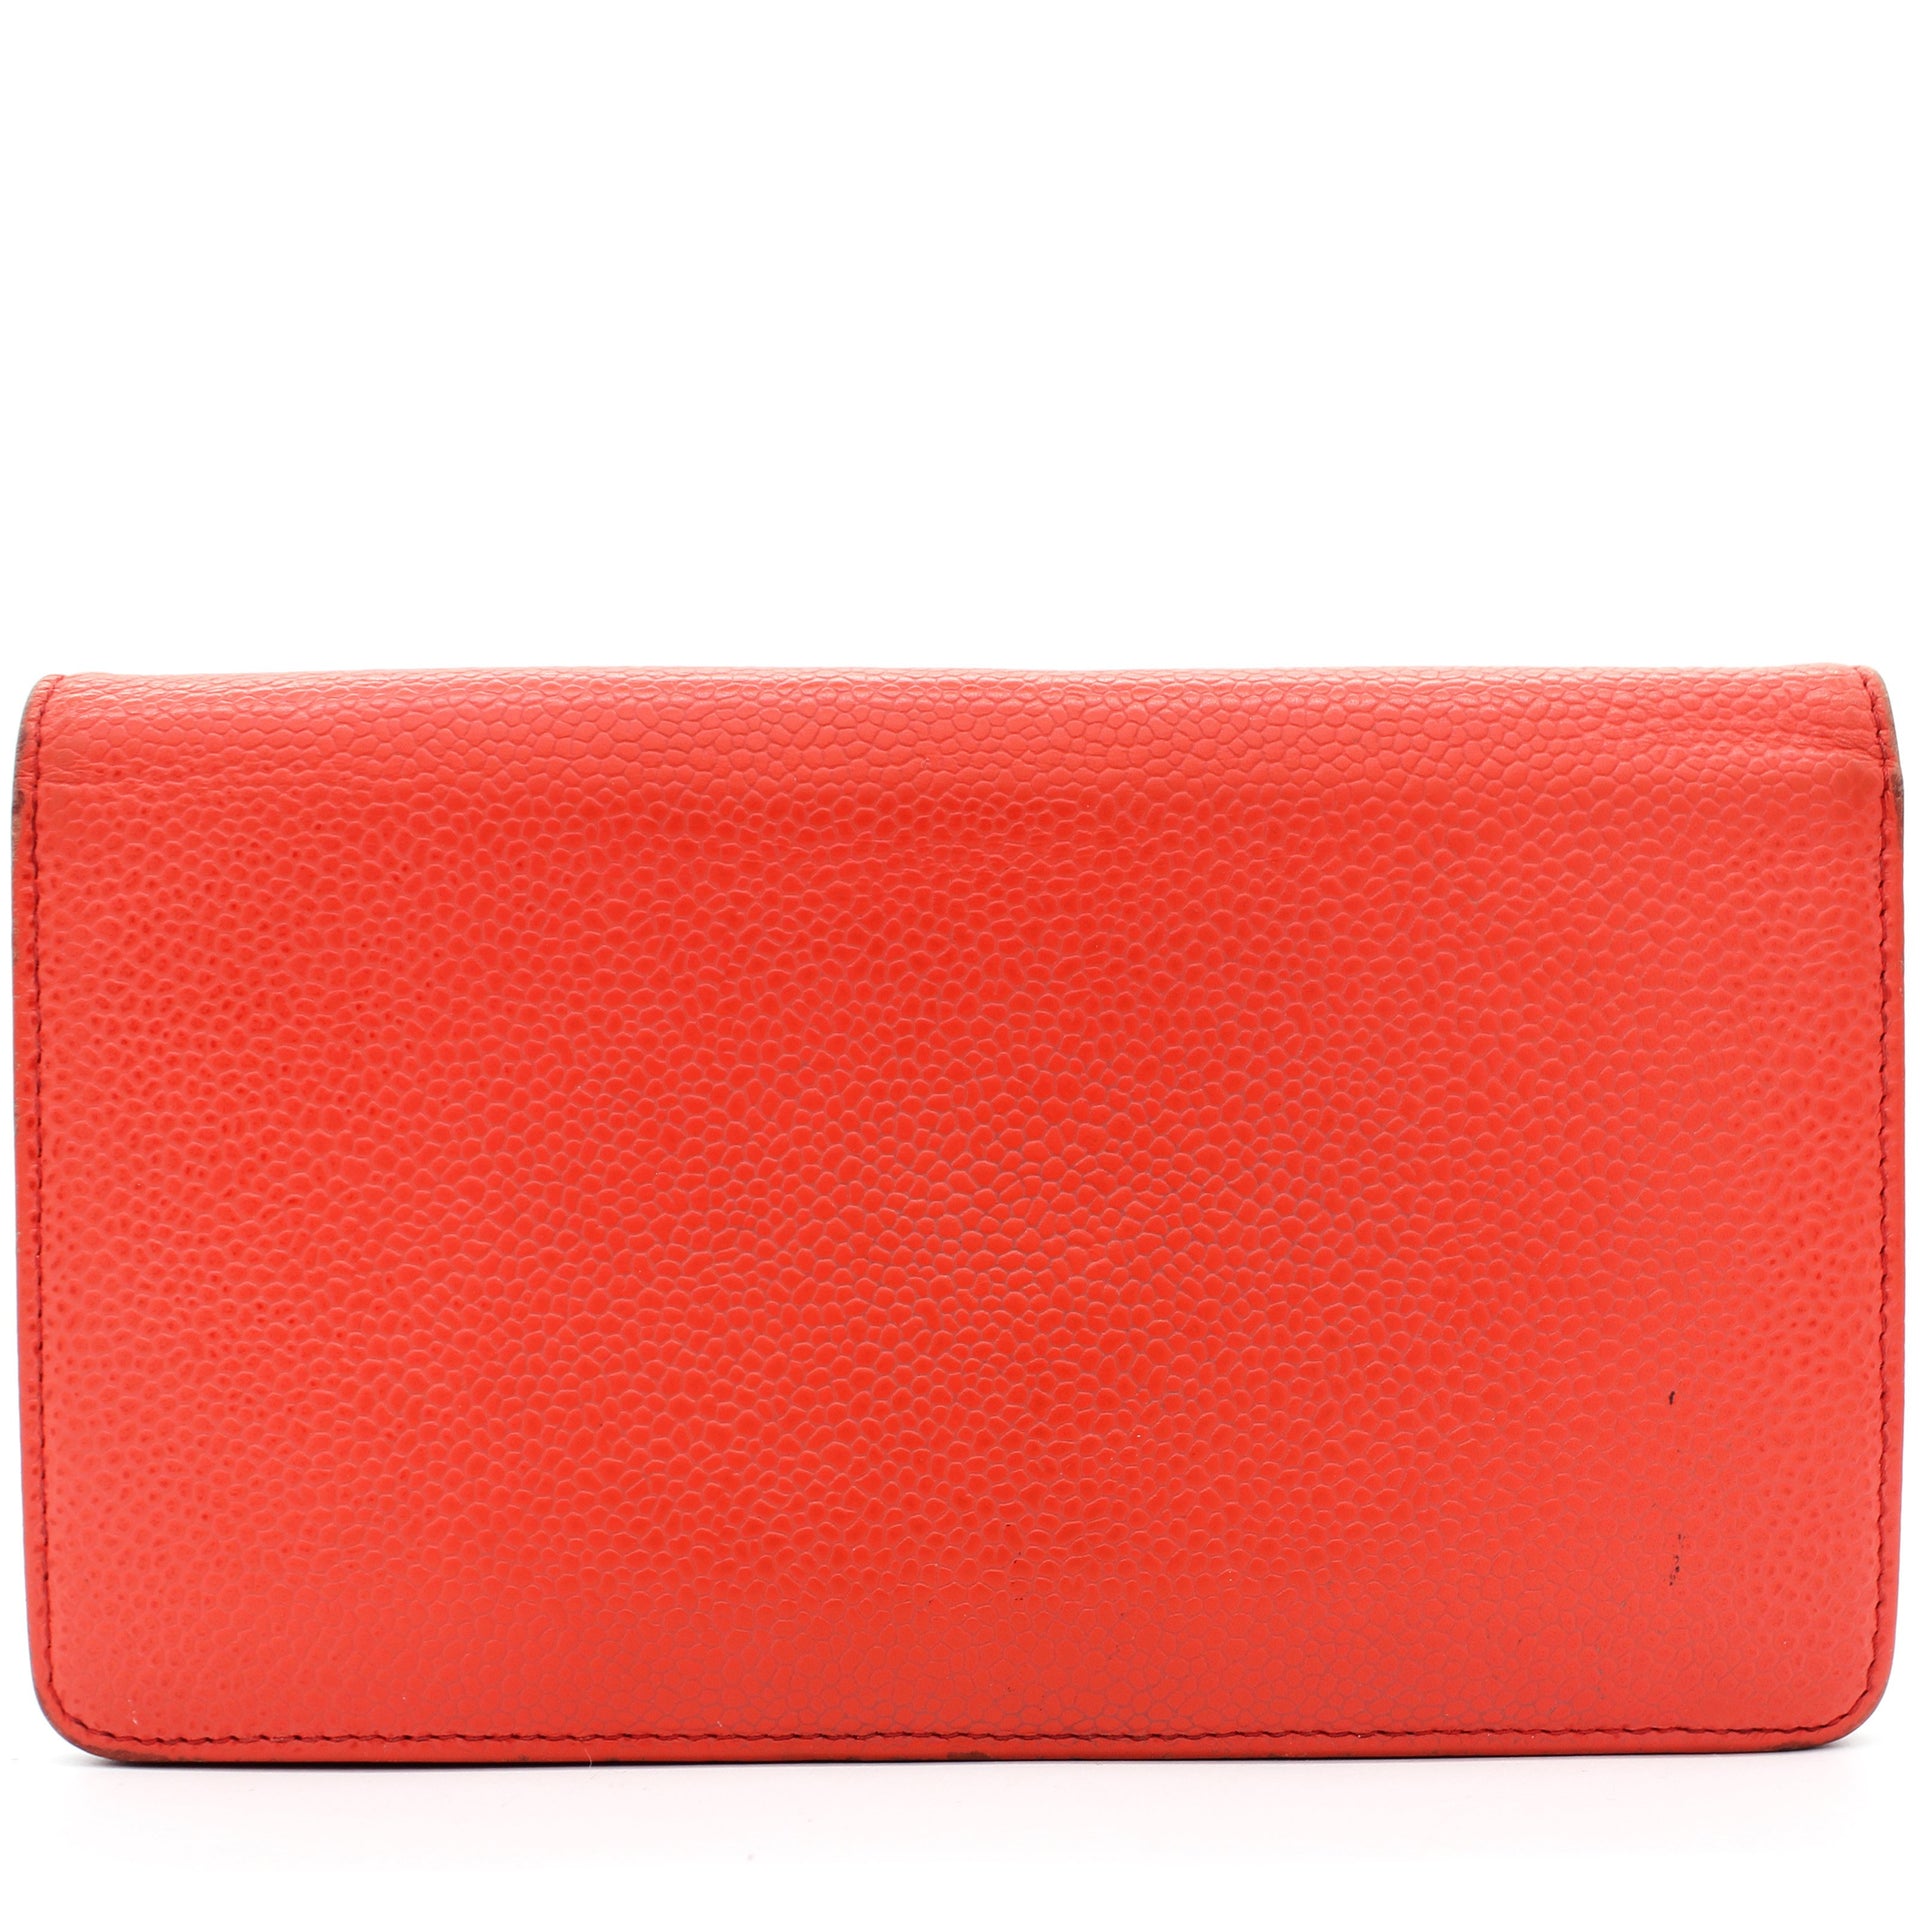 Coral Red Caviar Leather Large CC Wallet